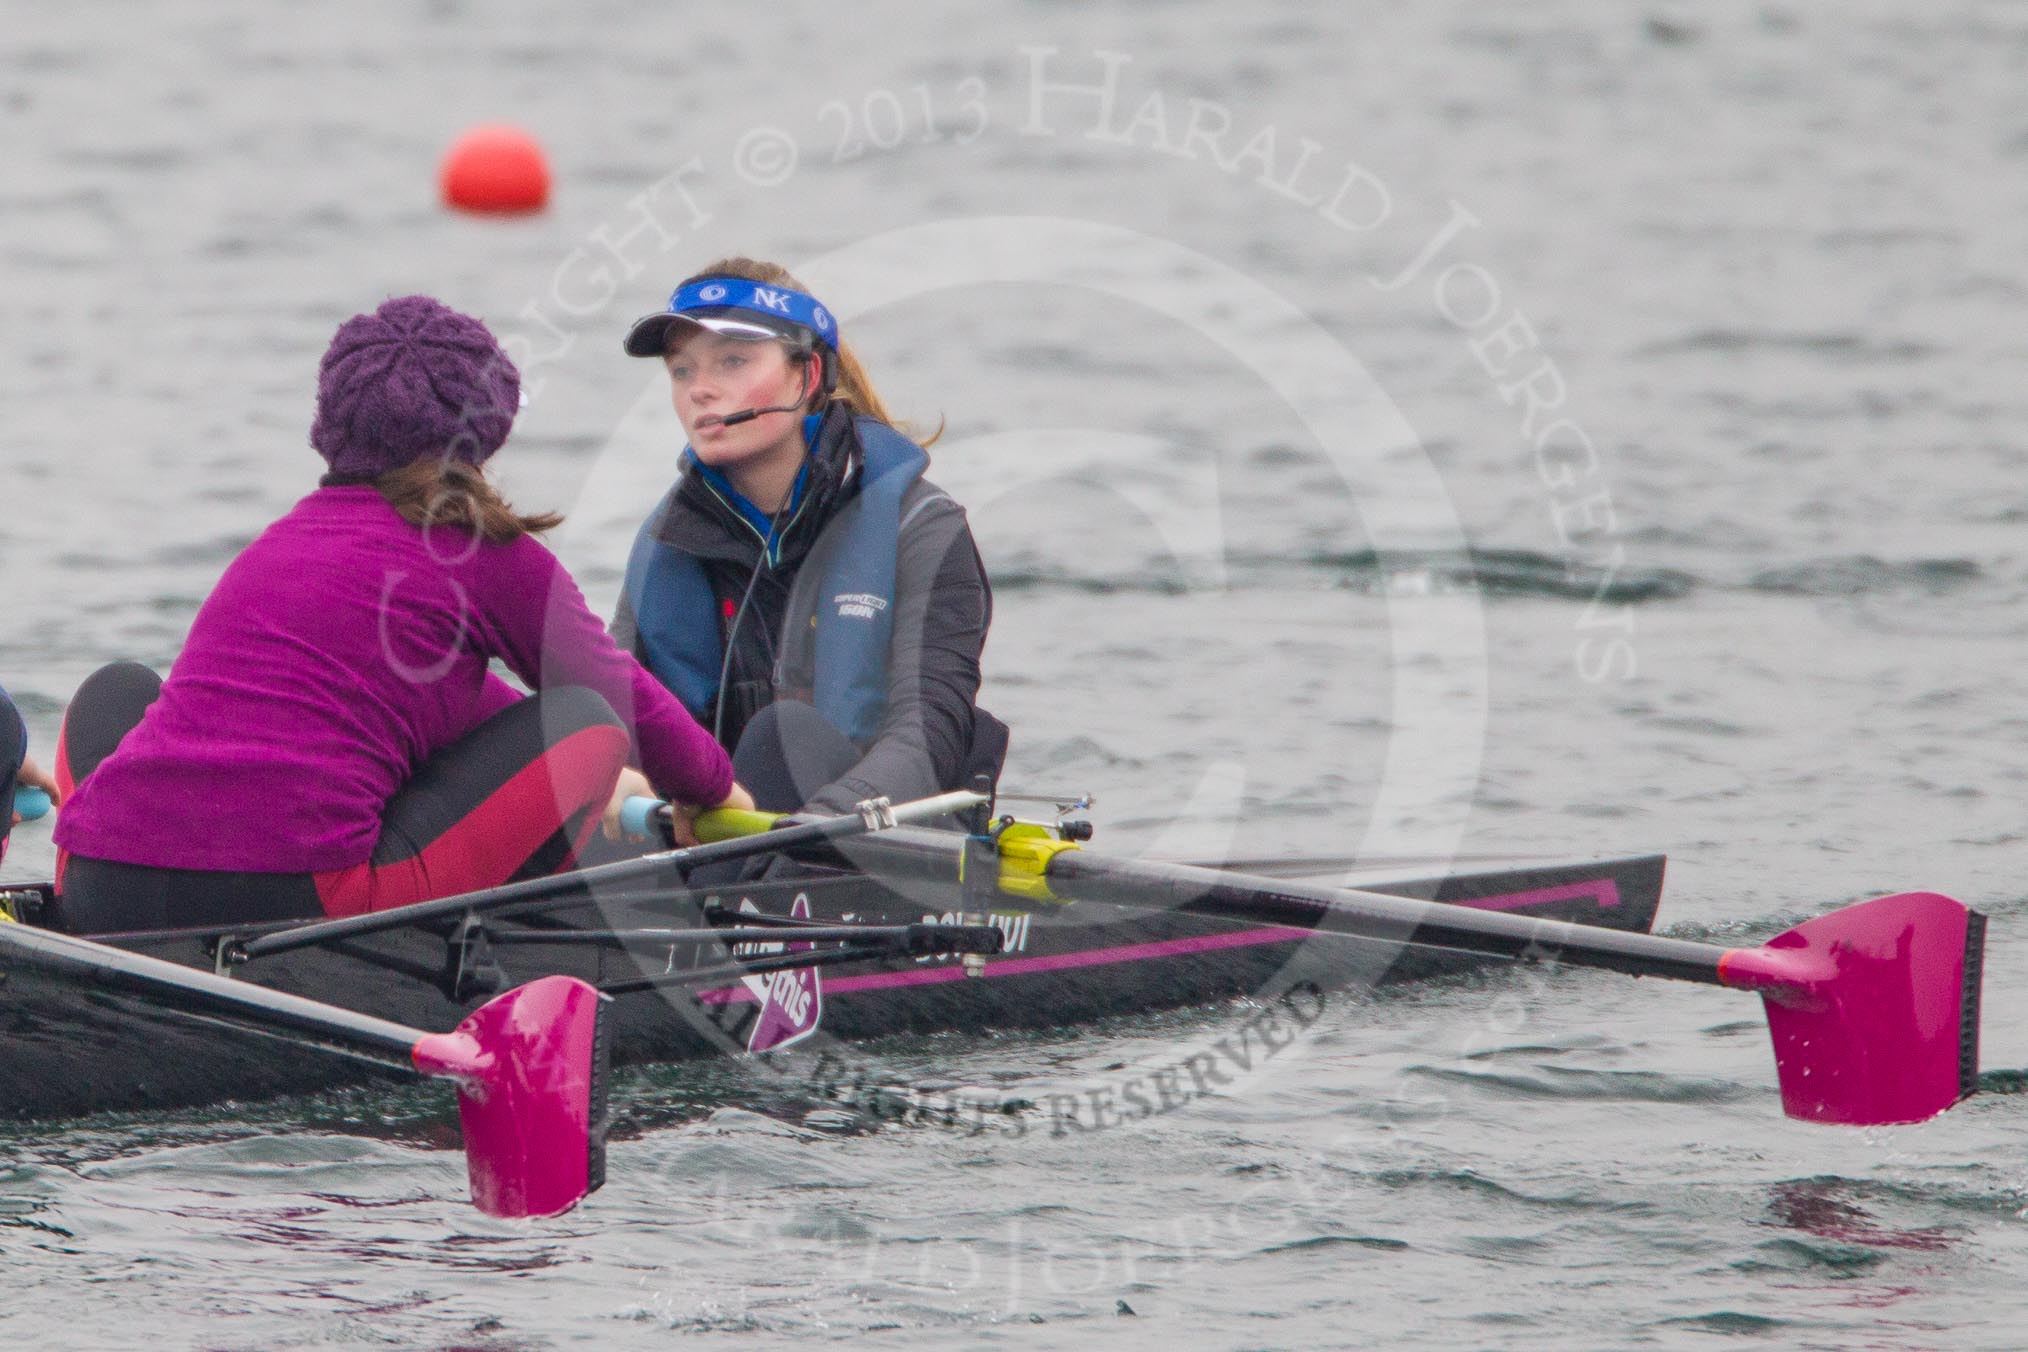 Intercollegiate Women's Race 2013: Downing College, Cambridge, with stroke Jennifer Joule and cox Ruth Wood.